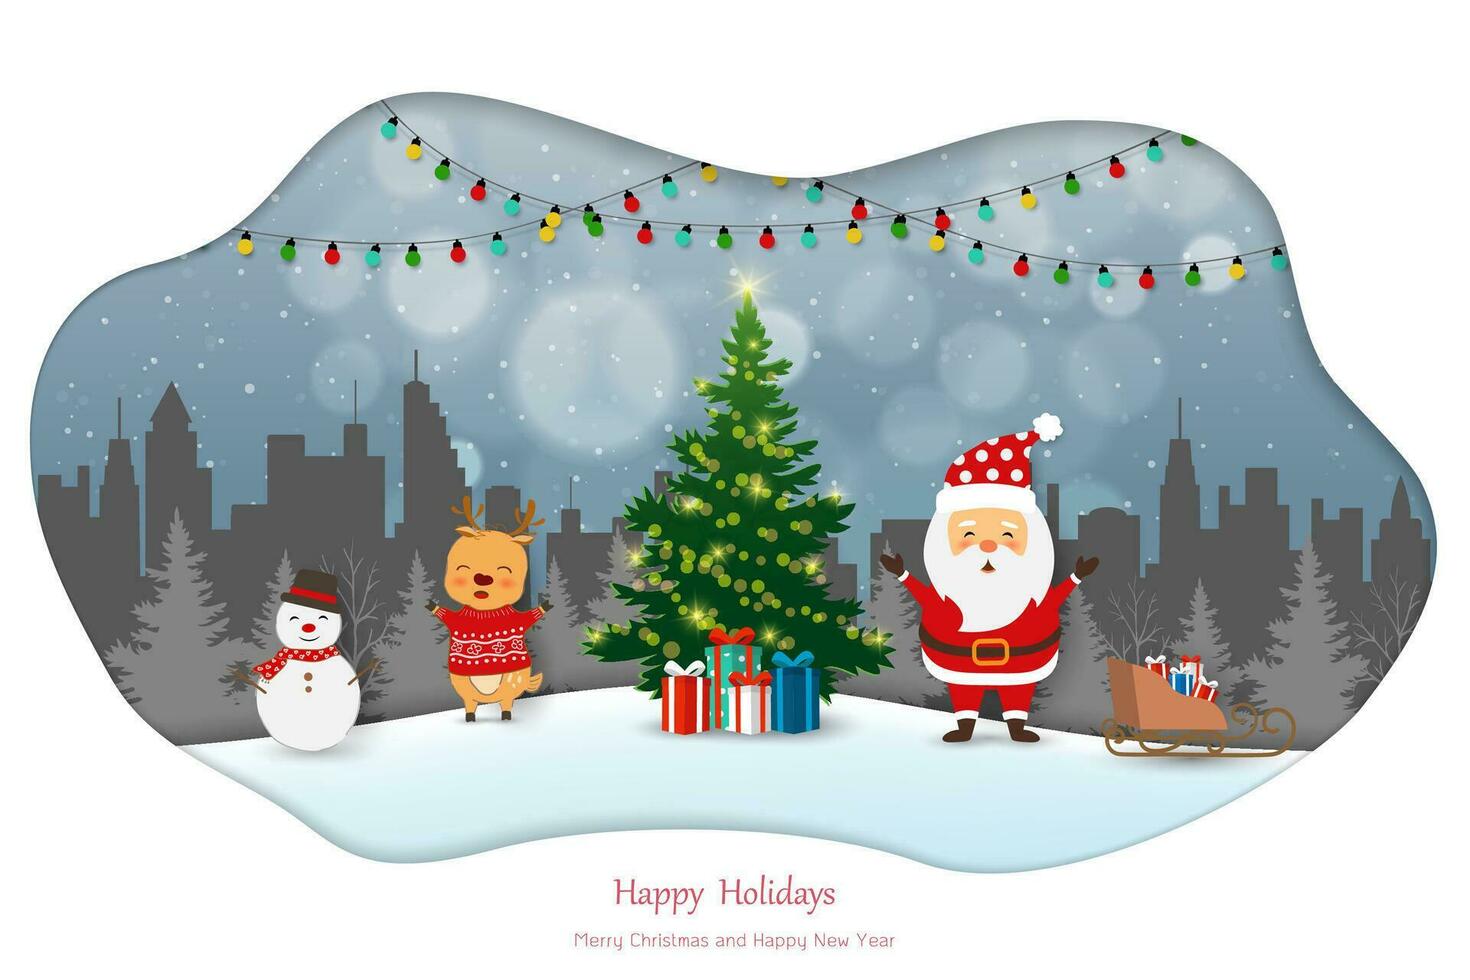 Merry Christmas and Happy new year greeting card,winter night landscape with Santa Claus and friends celebrate party on city background vector